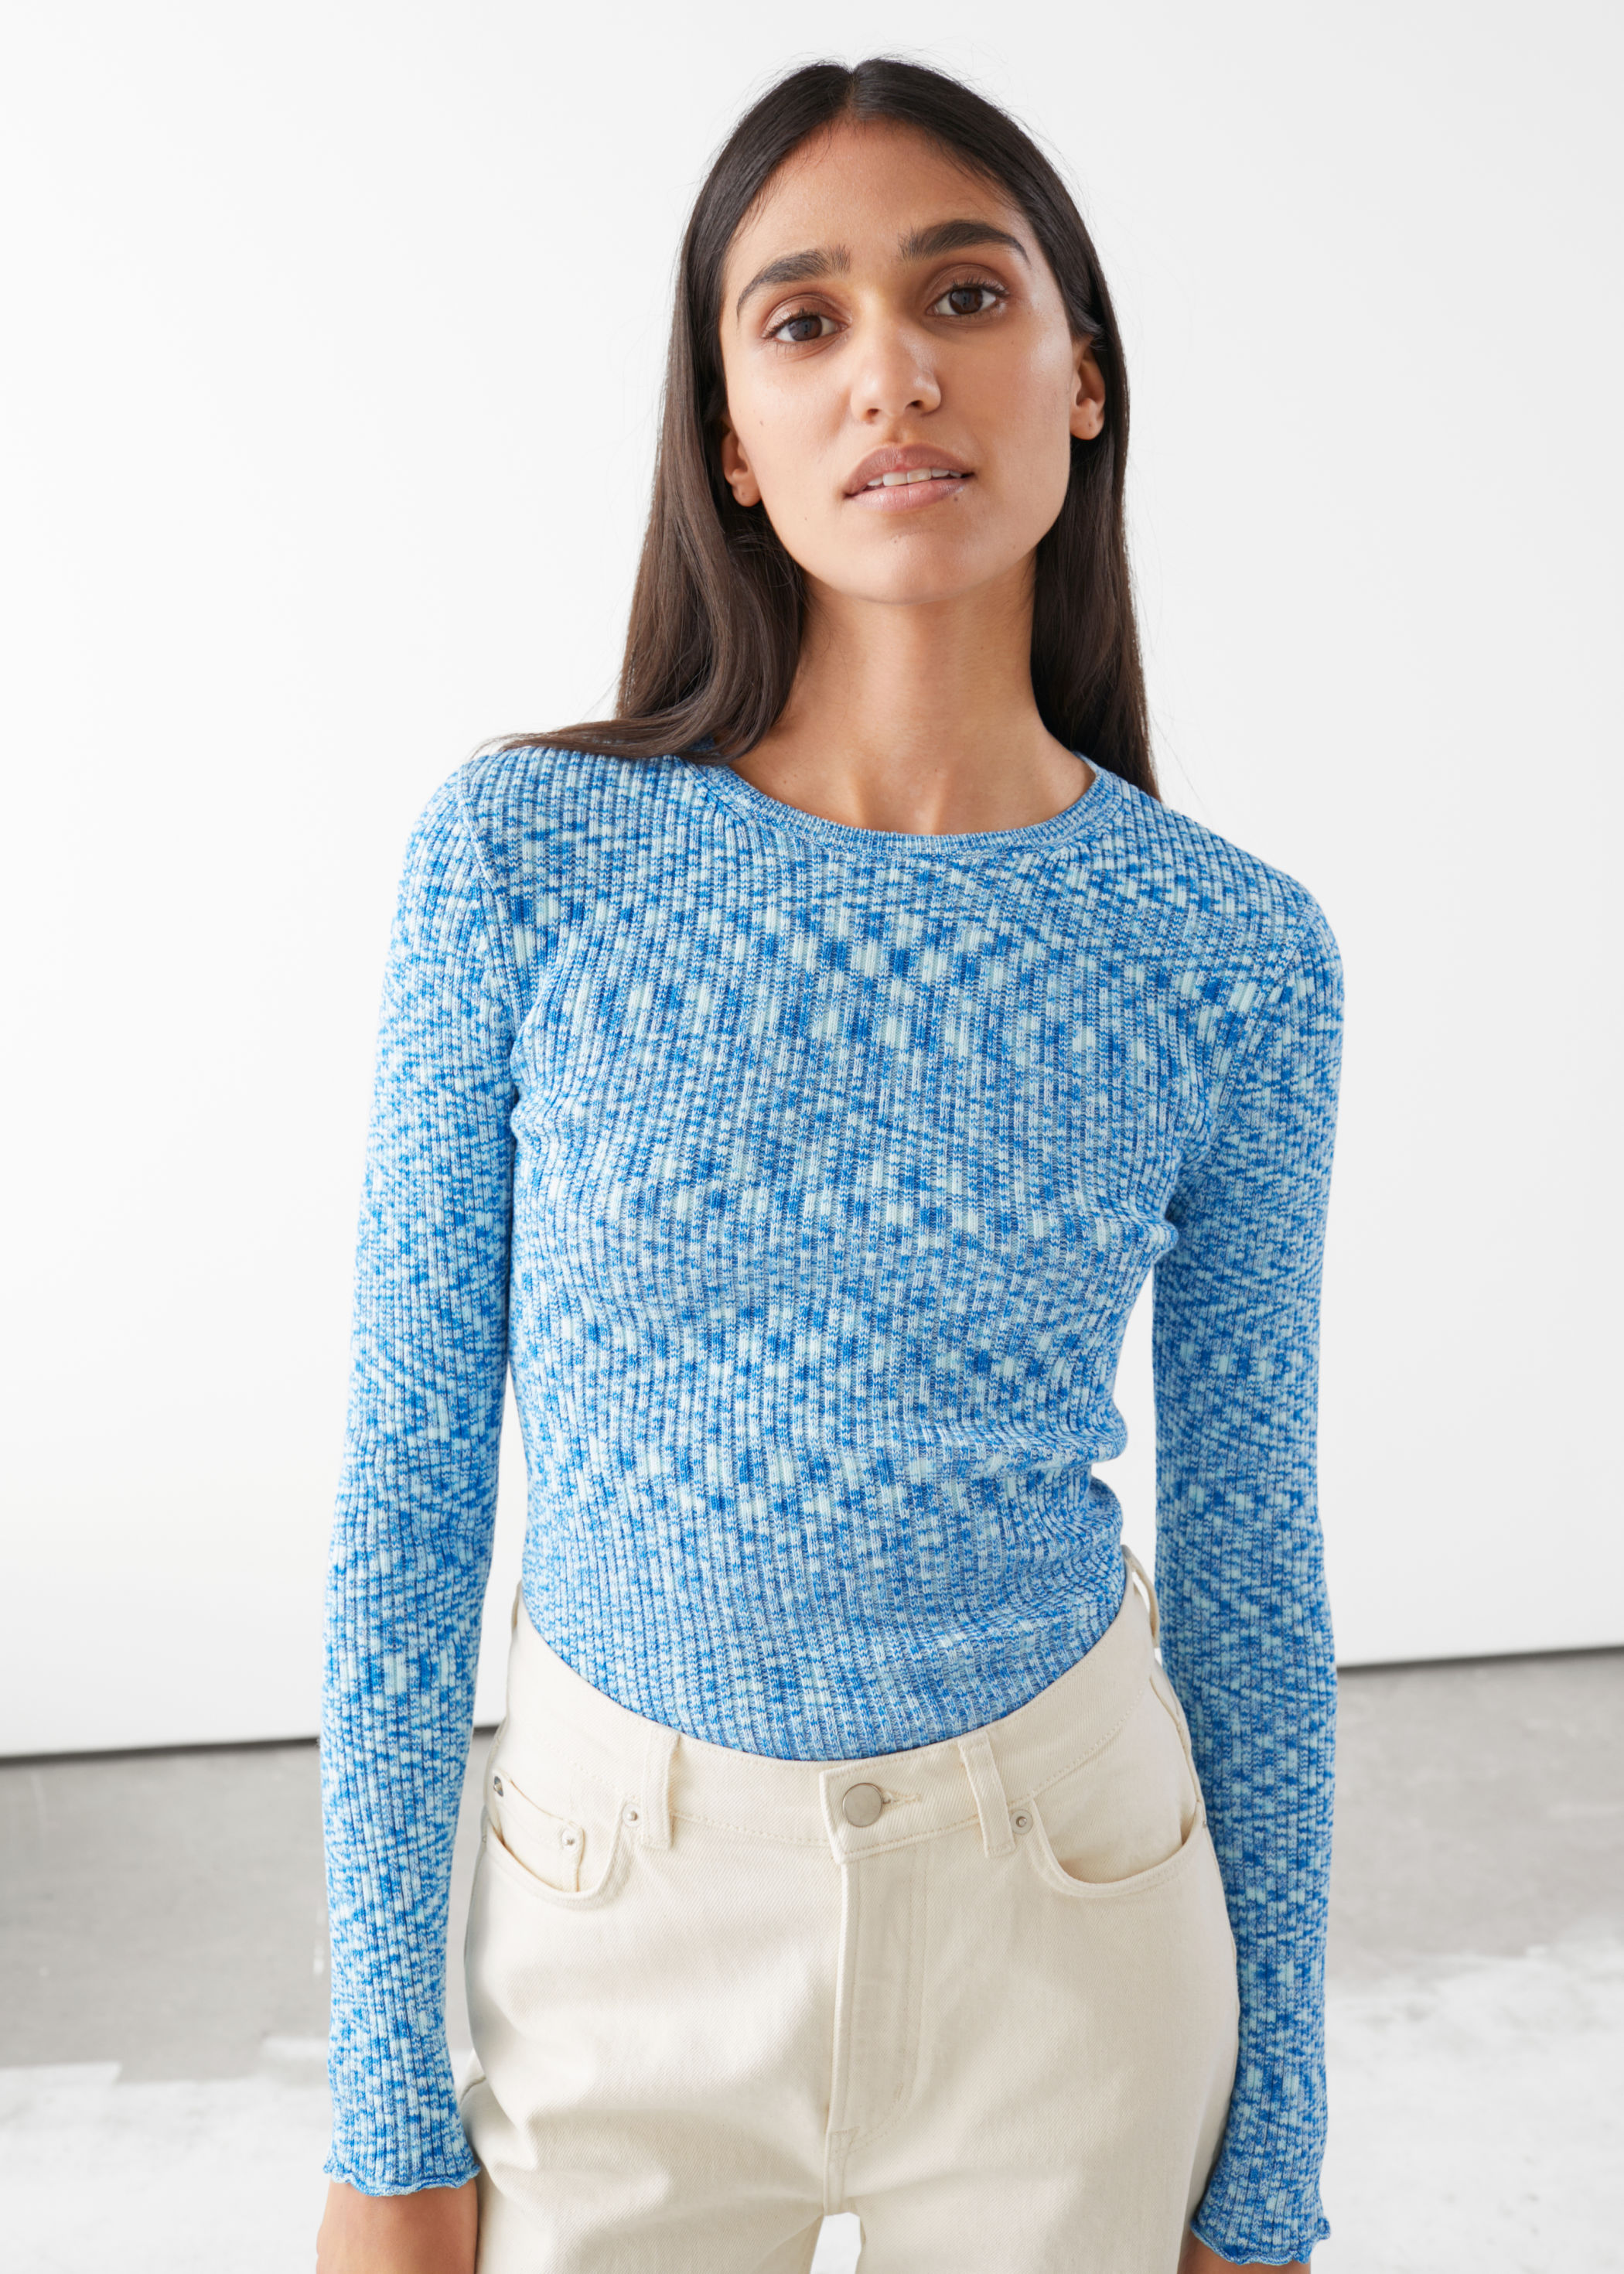  Other Stories Organic Cotton Lyocell Blend Sweater